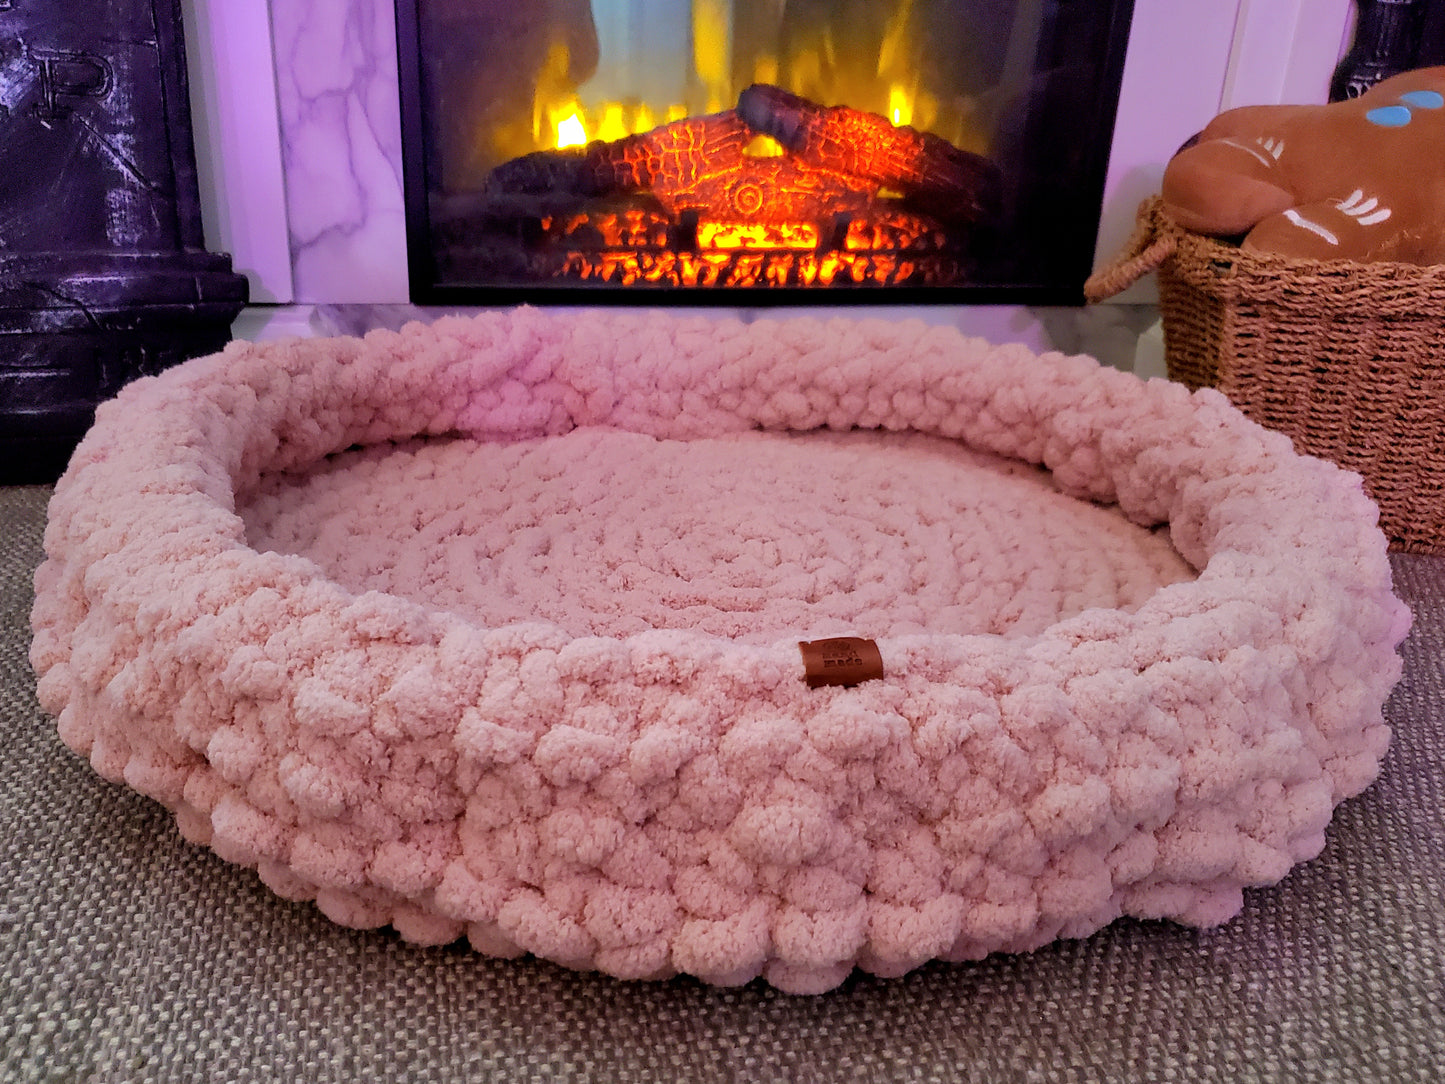 42" Dog Bed | XL Size Chenille Wool Pet Bed